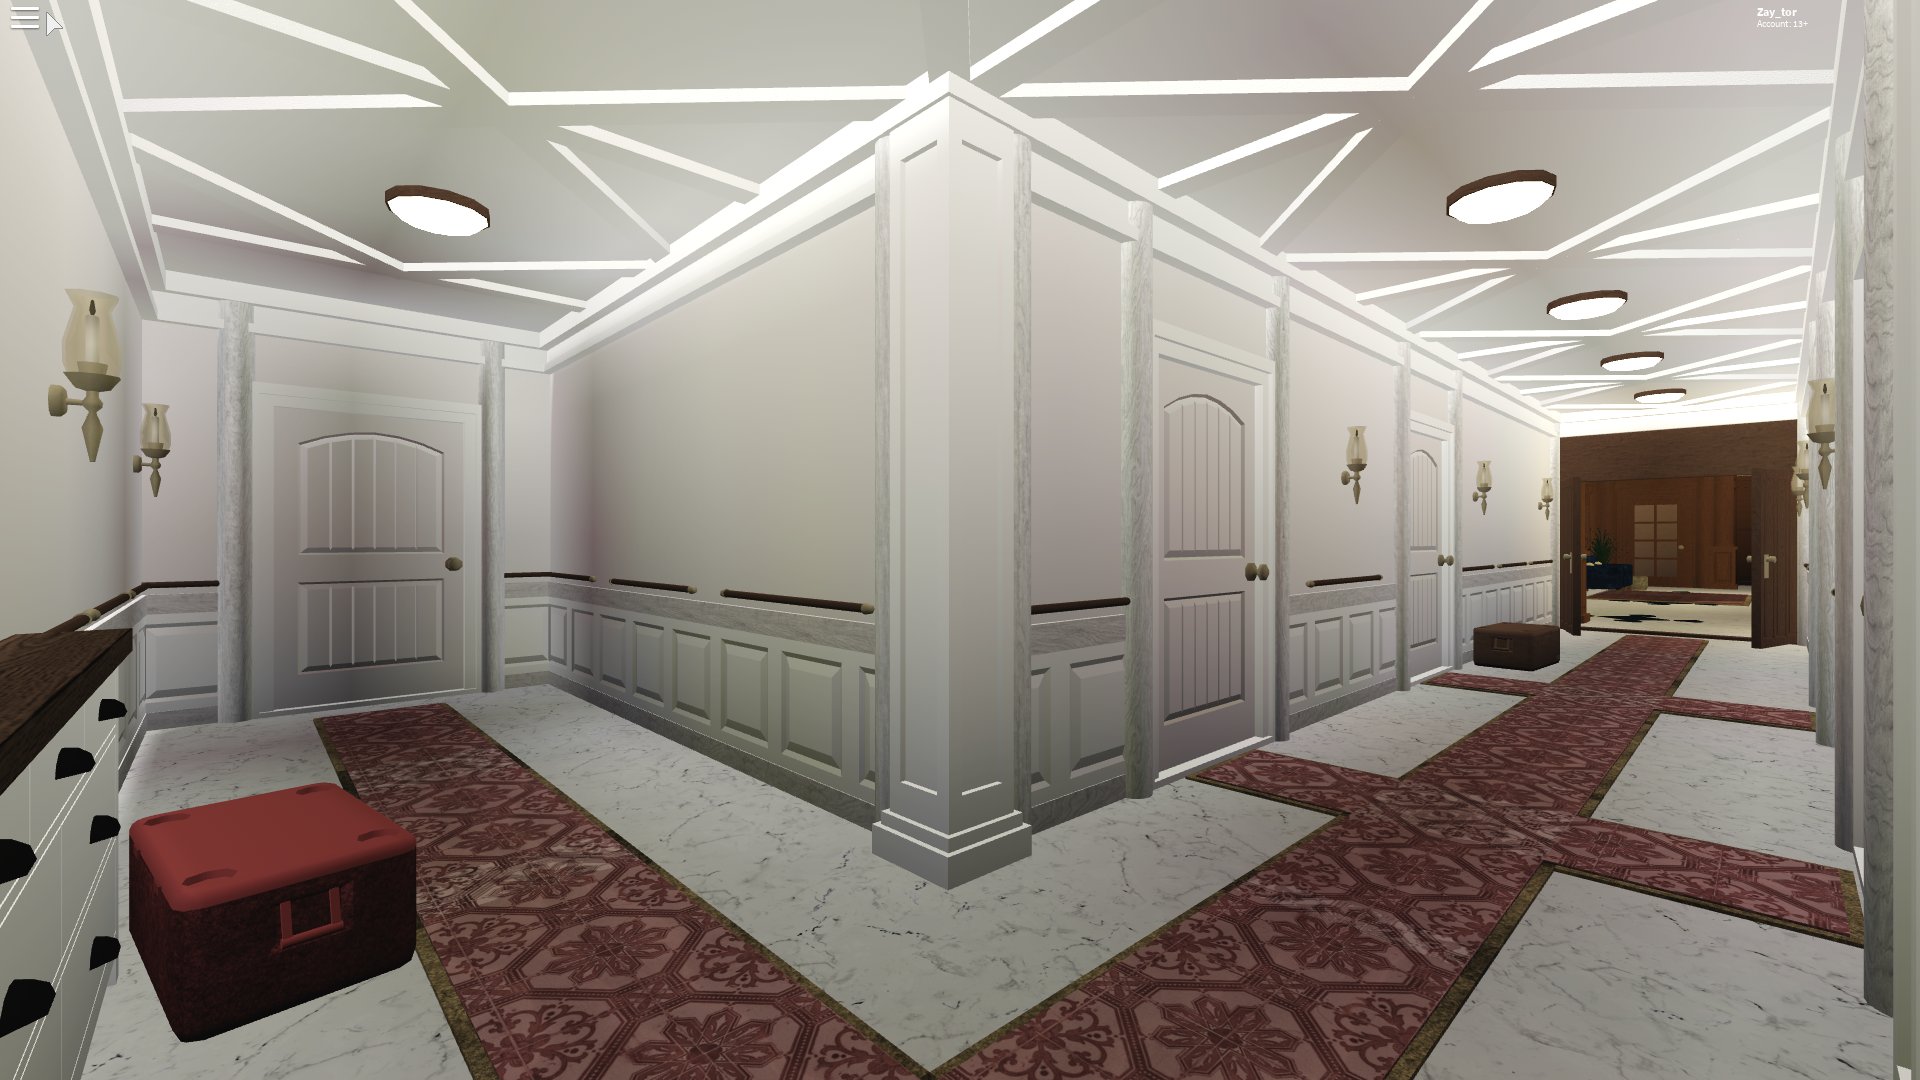 Zay Tor On Twitter I Decided To Make A New And More Detailed Titanic Grand Staircase Alongside With First Class Passage Hope You Enjoy Bloxburgnews Rbx Coeptus Theamazemanrblx Greekamphora Froggyhopz Rblx Https T Co Vsixfghtpg - roblox bloxburg titanic